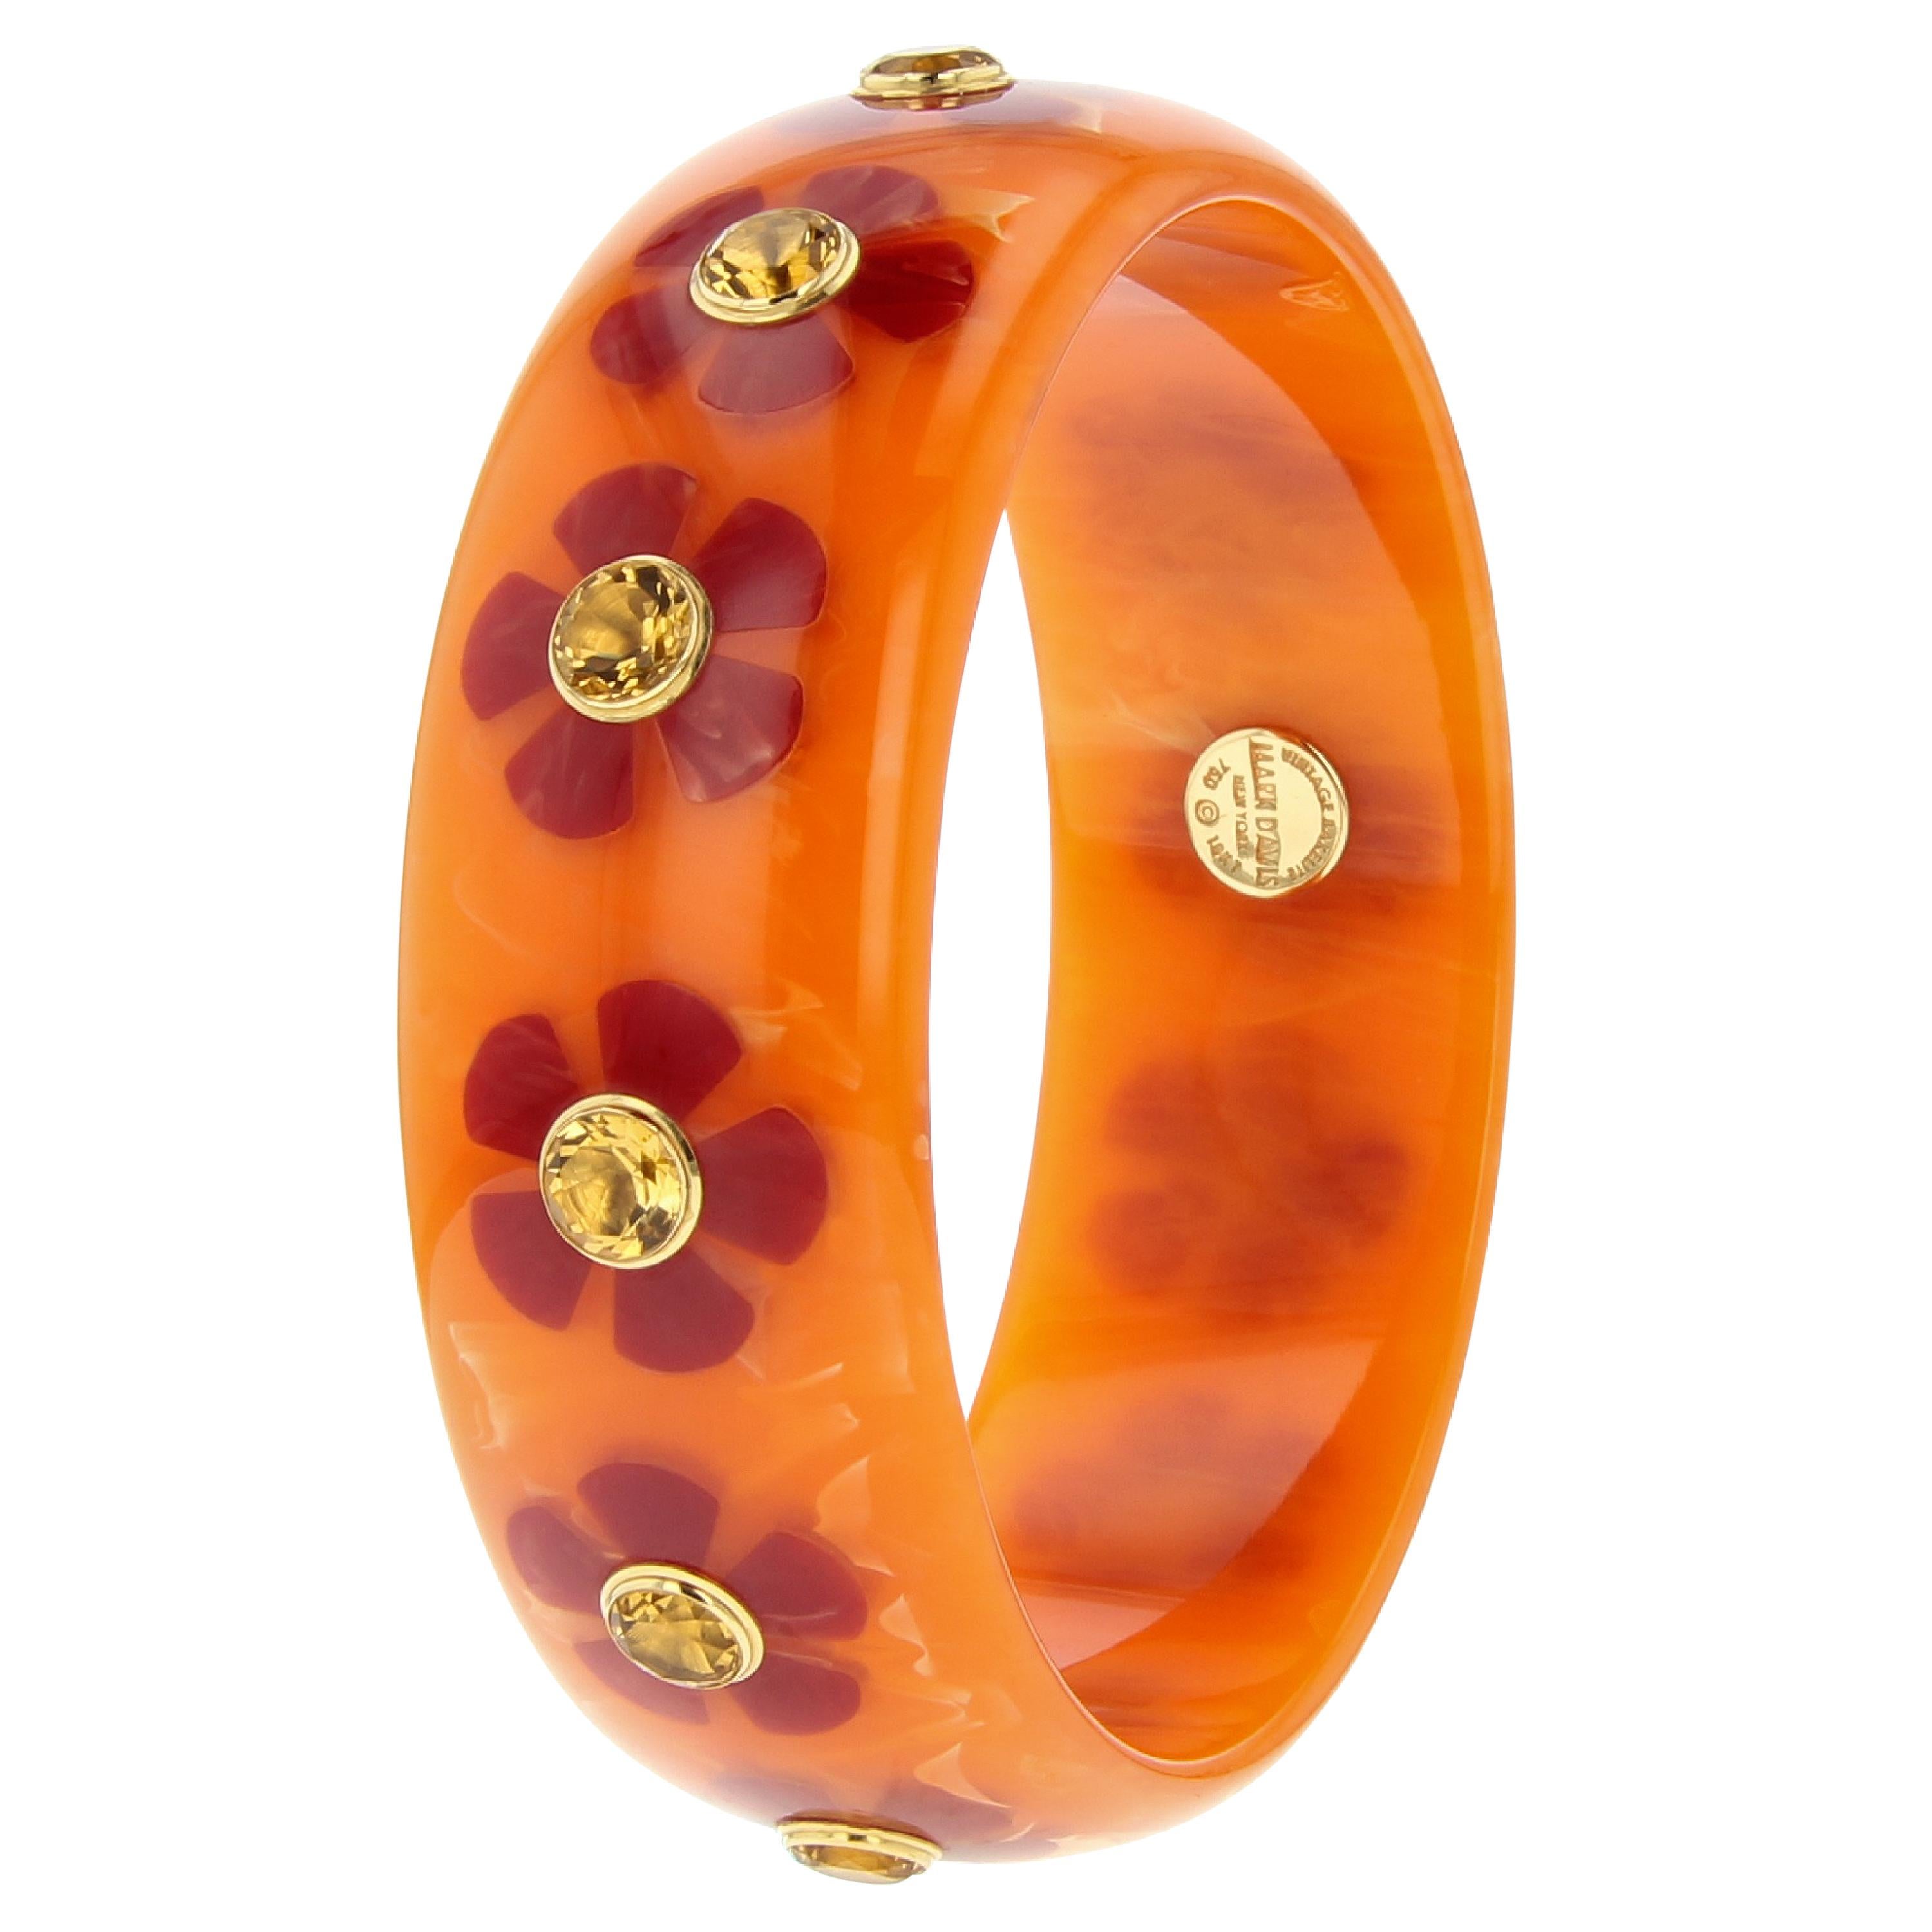 This fun and striking Mark Davis bangle was made from vintage, subtly marbled, orange bakelite. The bangle has been inlaid with burgundy bakelite flowers that have been randomly scattered around the bracelet. The flowers all feature a large